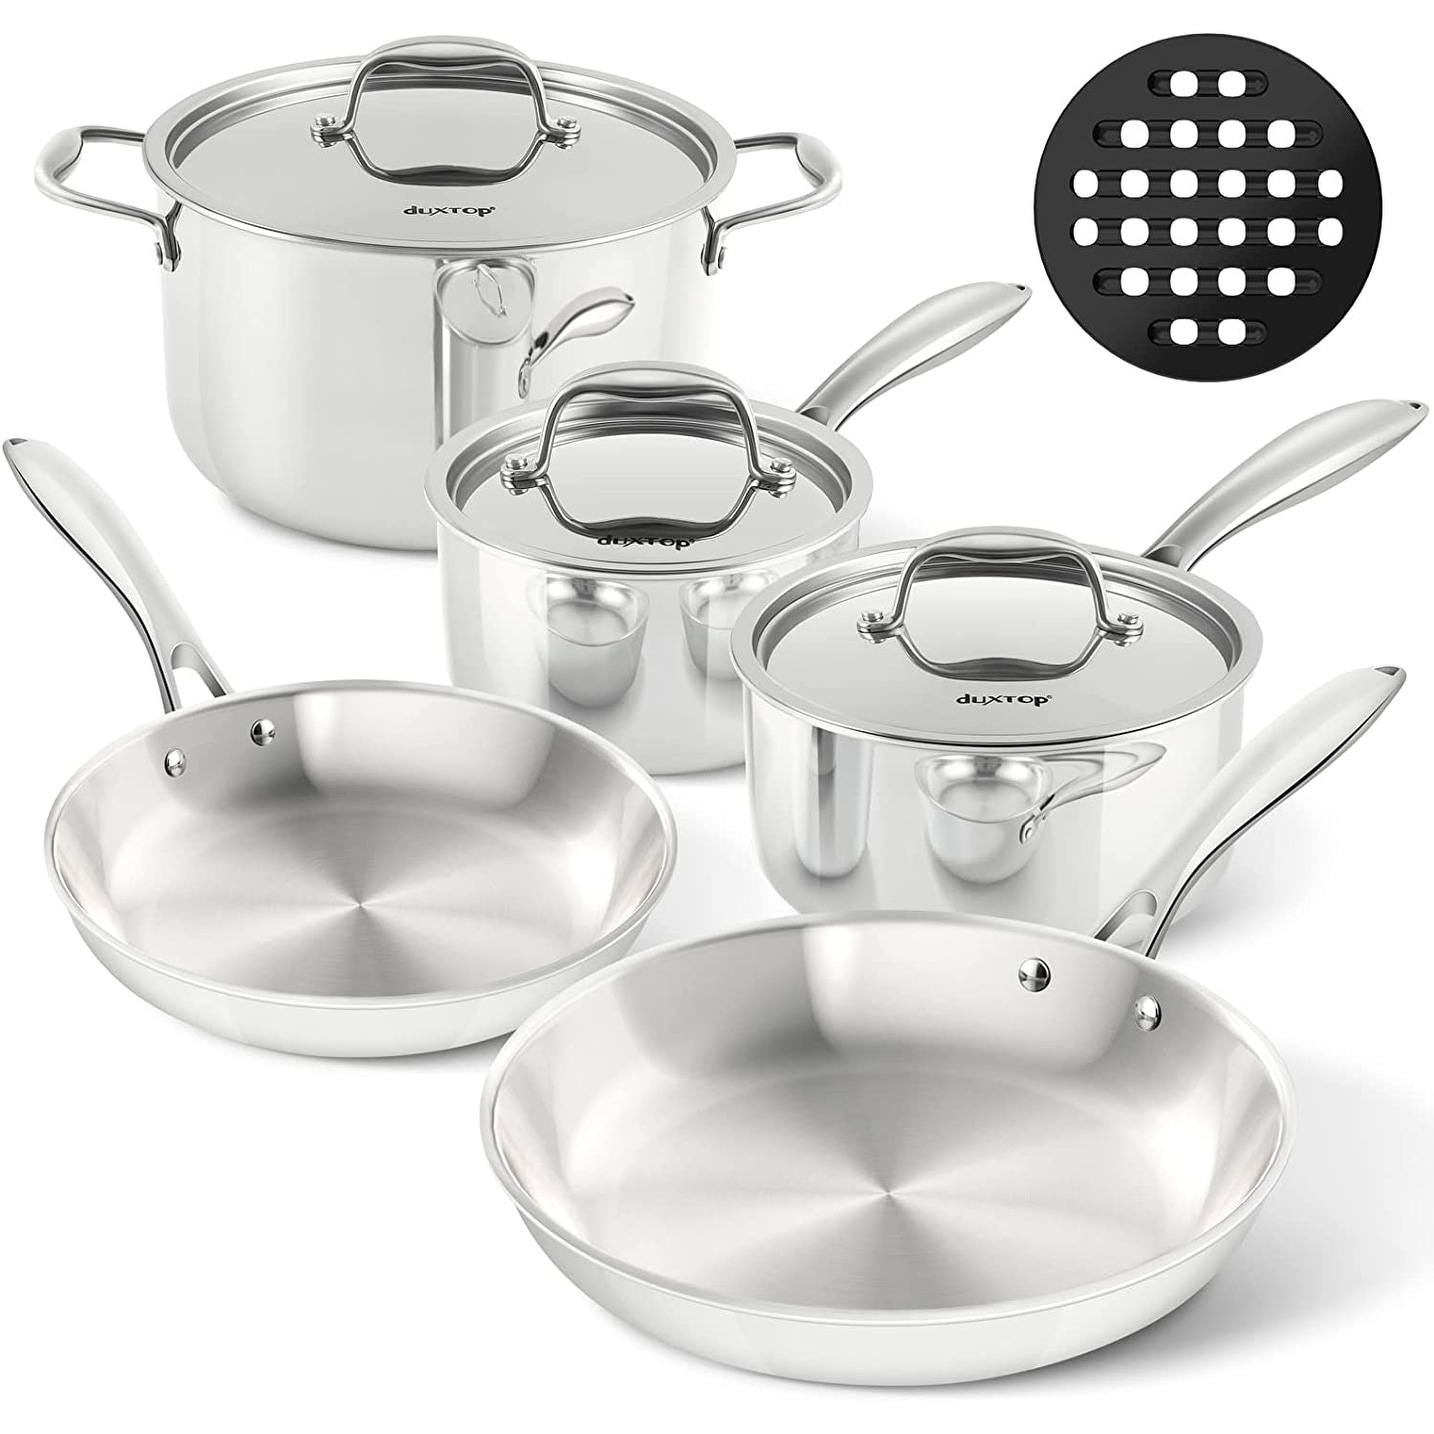 Whole-Clad Tri-Ply Stainless Steel Induction Cookware Set, 9PC